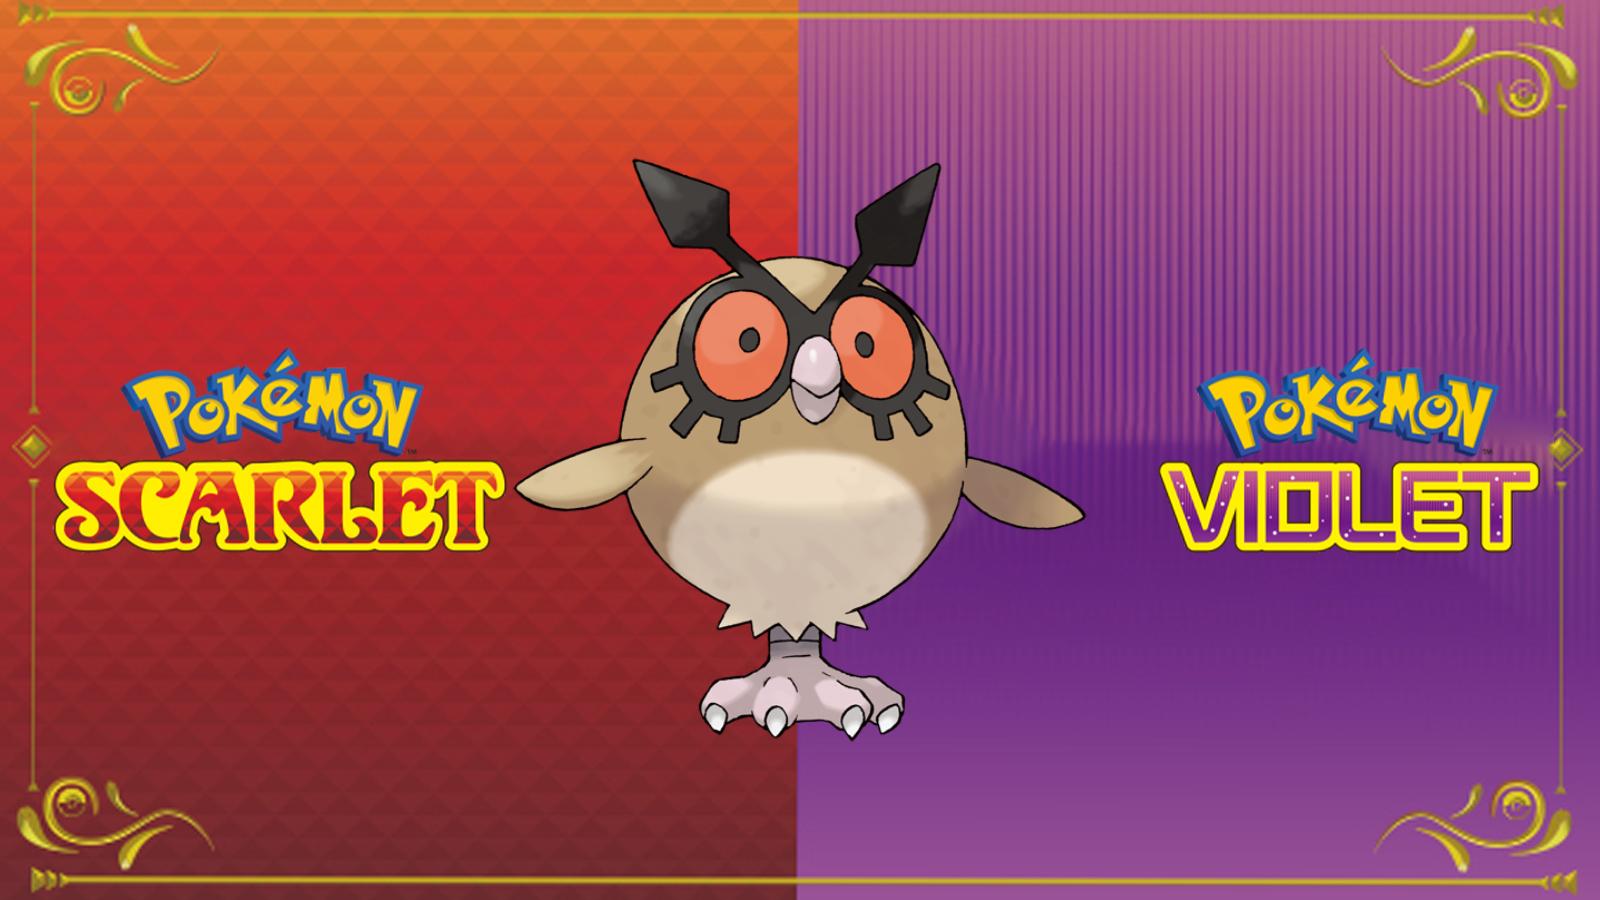 Hoothoot Pokemon Scarlet and Violet